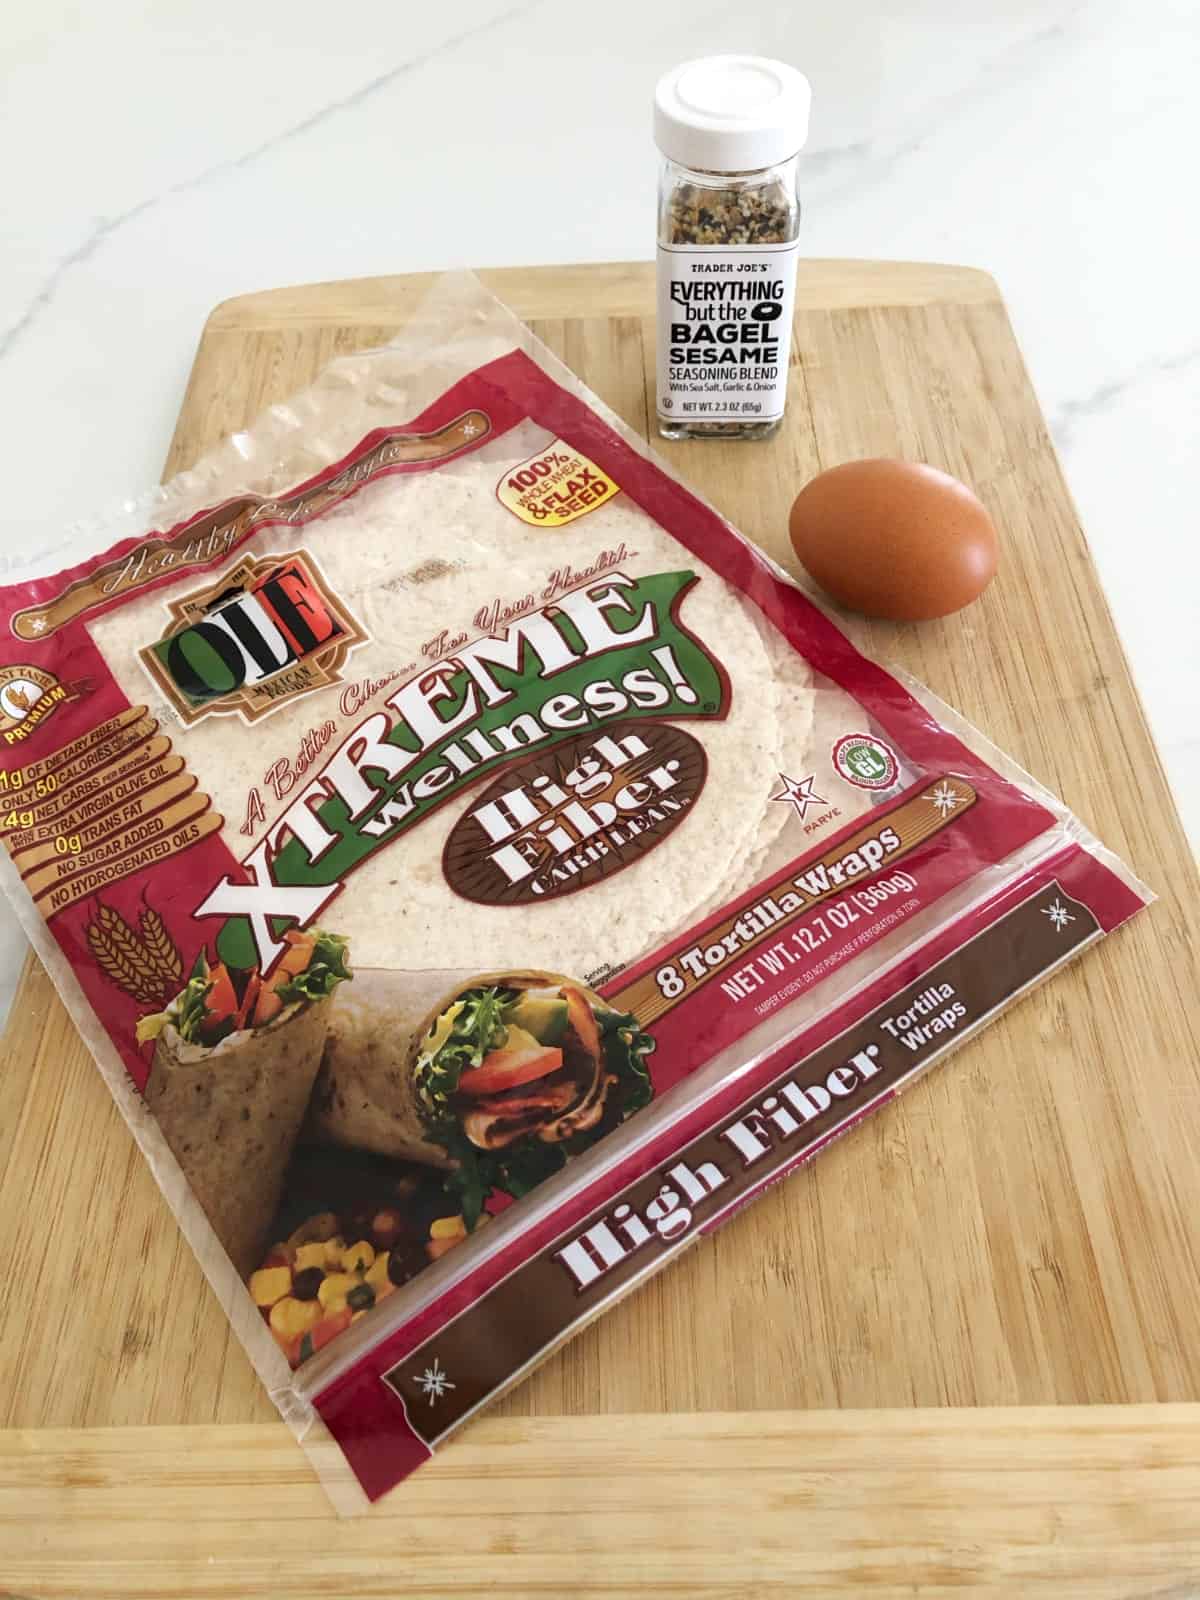 Package of high fiber, low carb tortillas on bamboo cutting board with egg and everything but the bagel seasoning